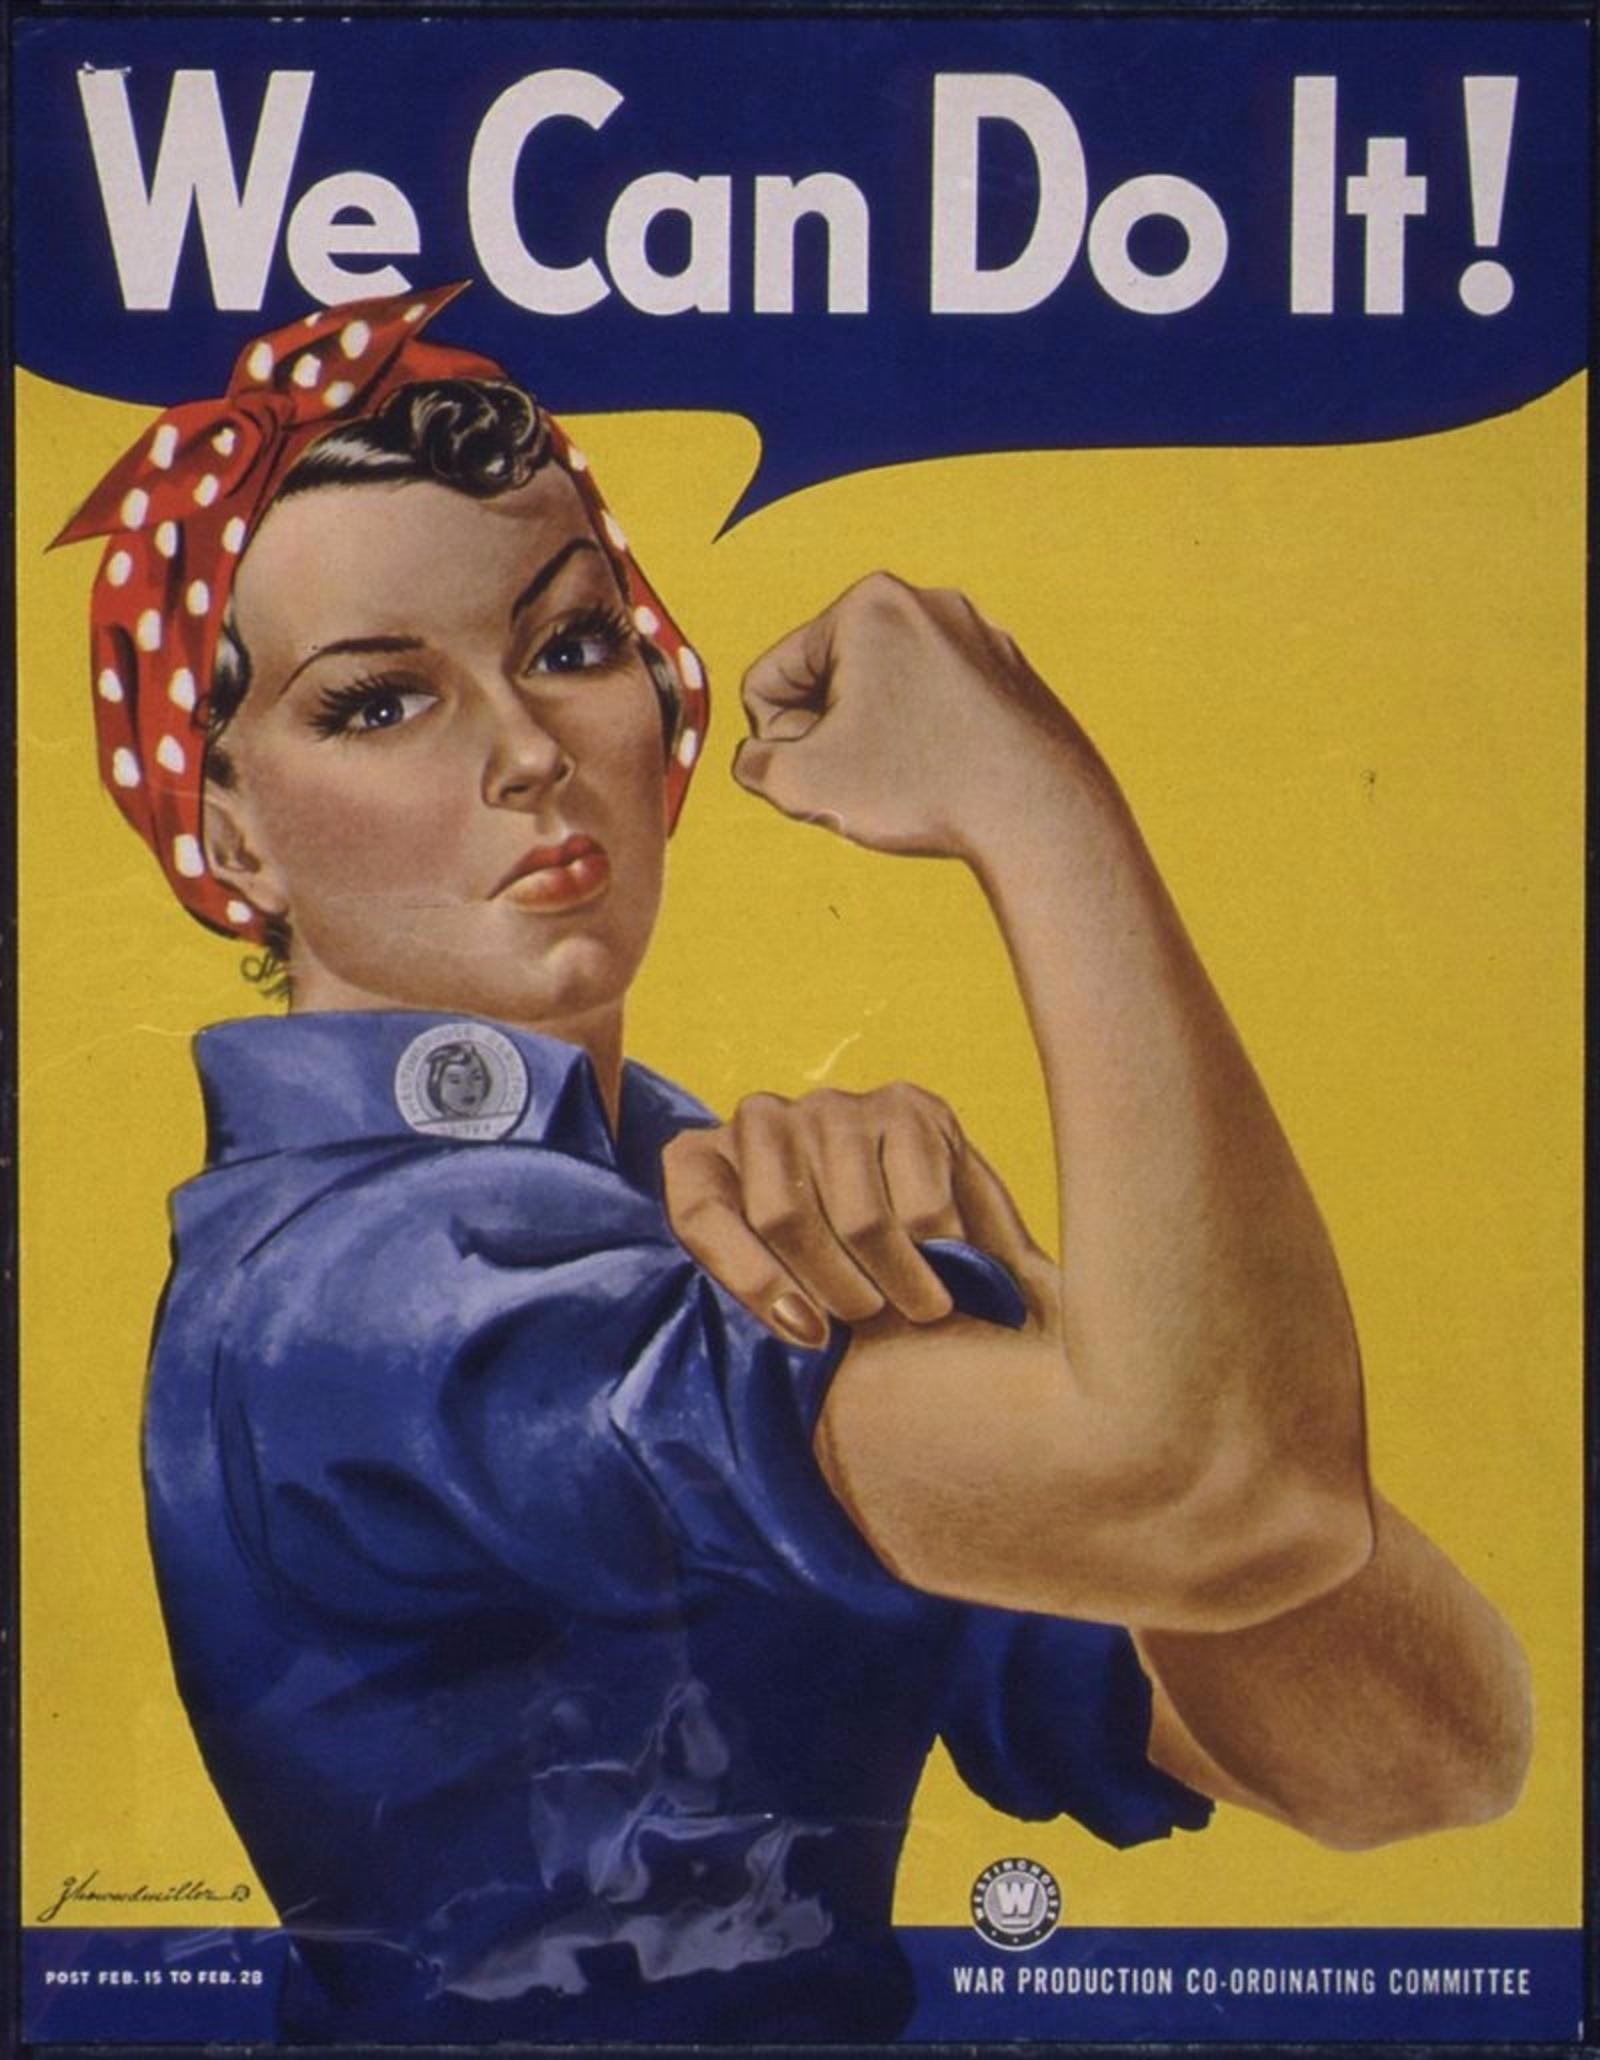 If Rosie the Riveter could inspire positive social action among the Greatest Generation, Crawford asks, what's holding us back?